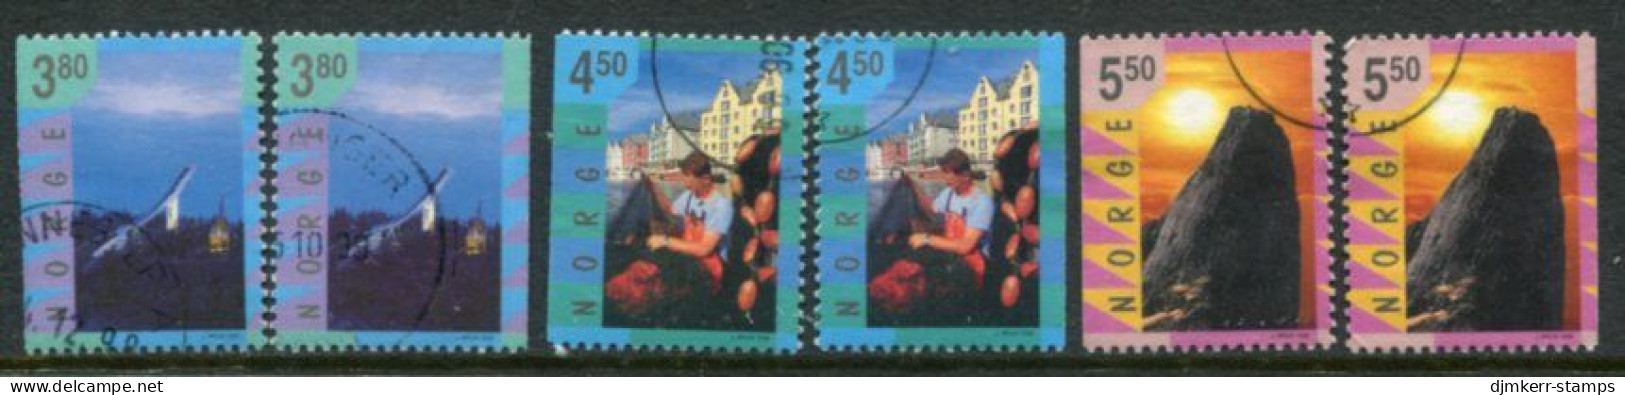 NORWAY 1998 Tourism Used.   Michel 1282-83 Dl-Dr - Used Stamps